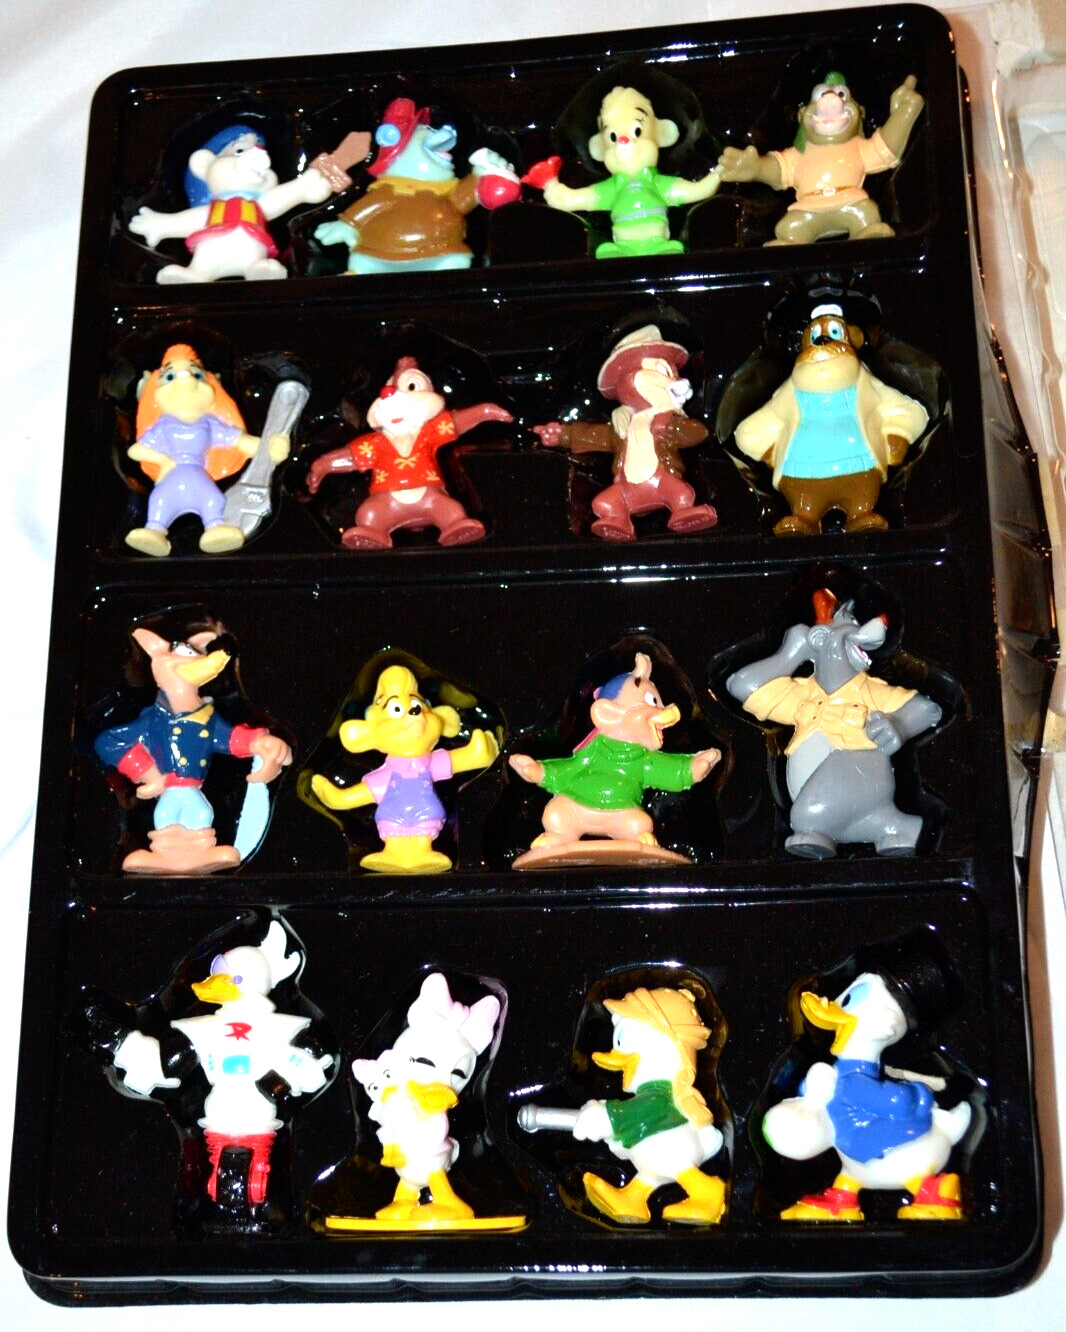 Rescue Rangers Talespin Disney Afternoon Figures S/16 In Holder Vintage 1991